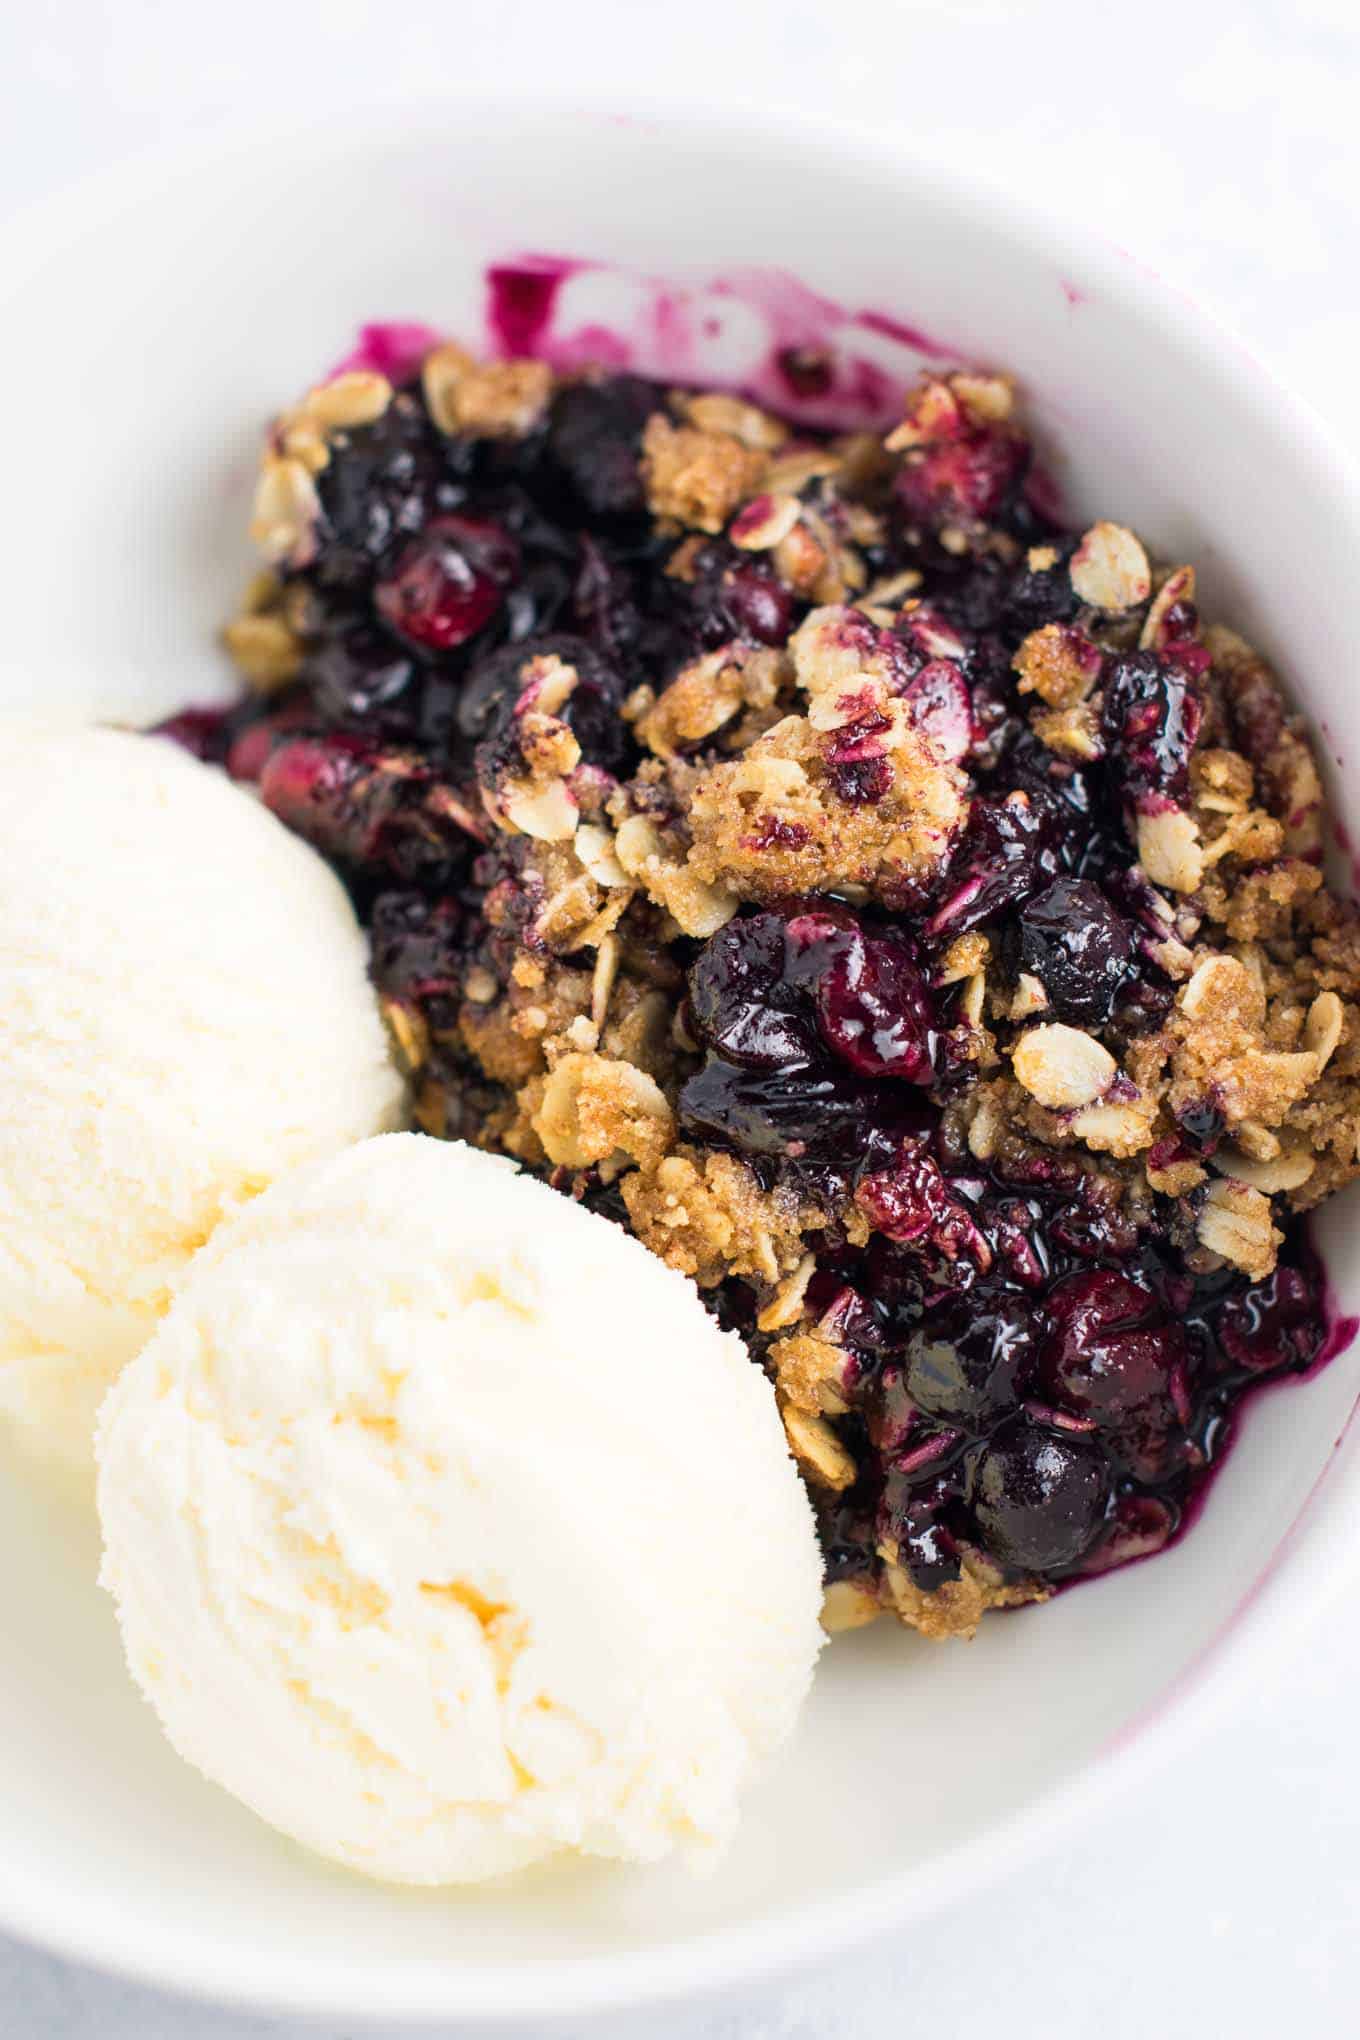 fresh cranberry recipes - This Cranberry Blueberry Crisp recipe is packed full of flavor and ready for the oven in less than 15 minutes! Gluten free and vegan. #cranberryblueberrycrisp #cranberry #dessert #vegan #glutenfree